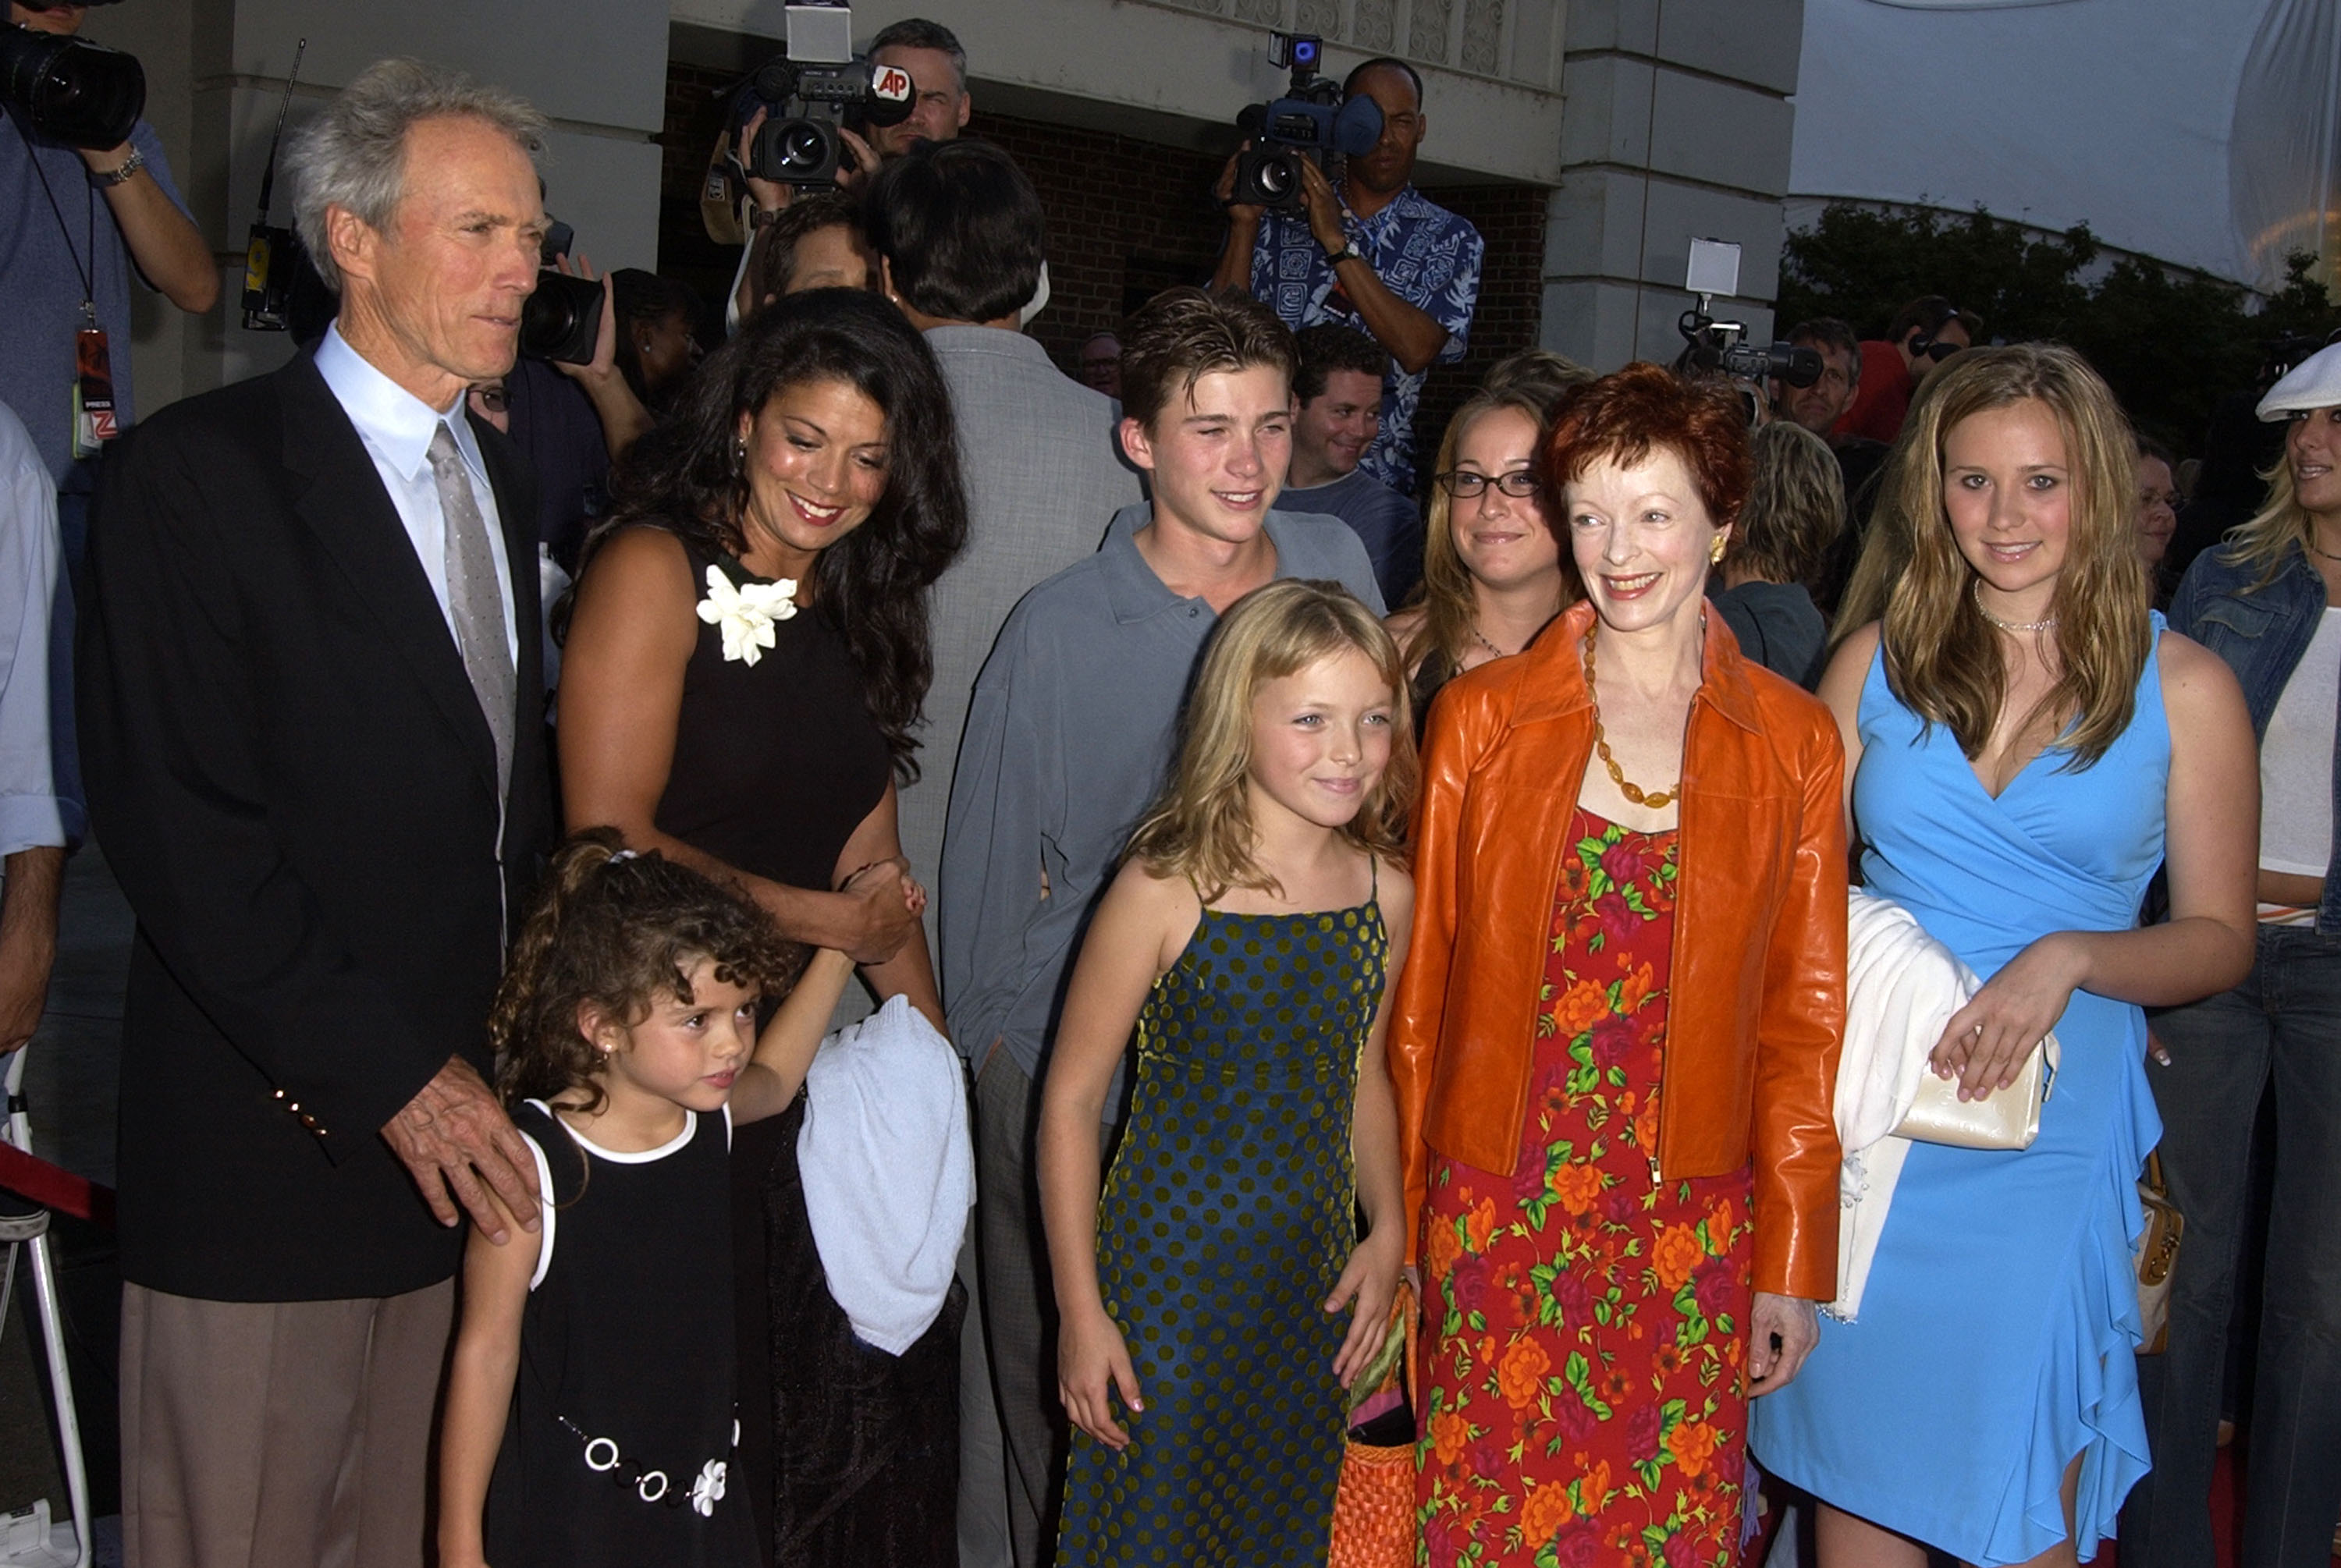 Clint Eastwood, Dina Eastwood, Frances Fisher & children Scott, Kathryn, Francesca & Morgan at the "Blood Work" premiere in 2002 | Source: Getty Images